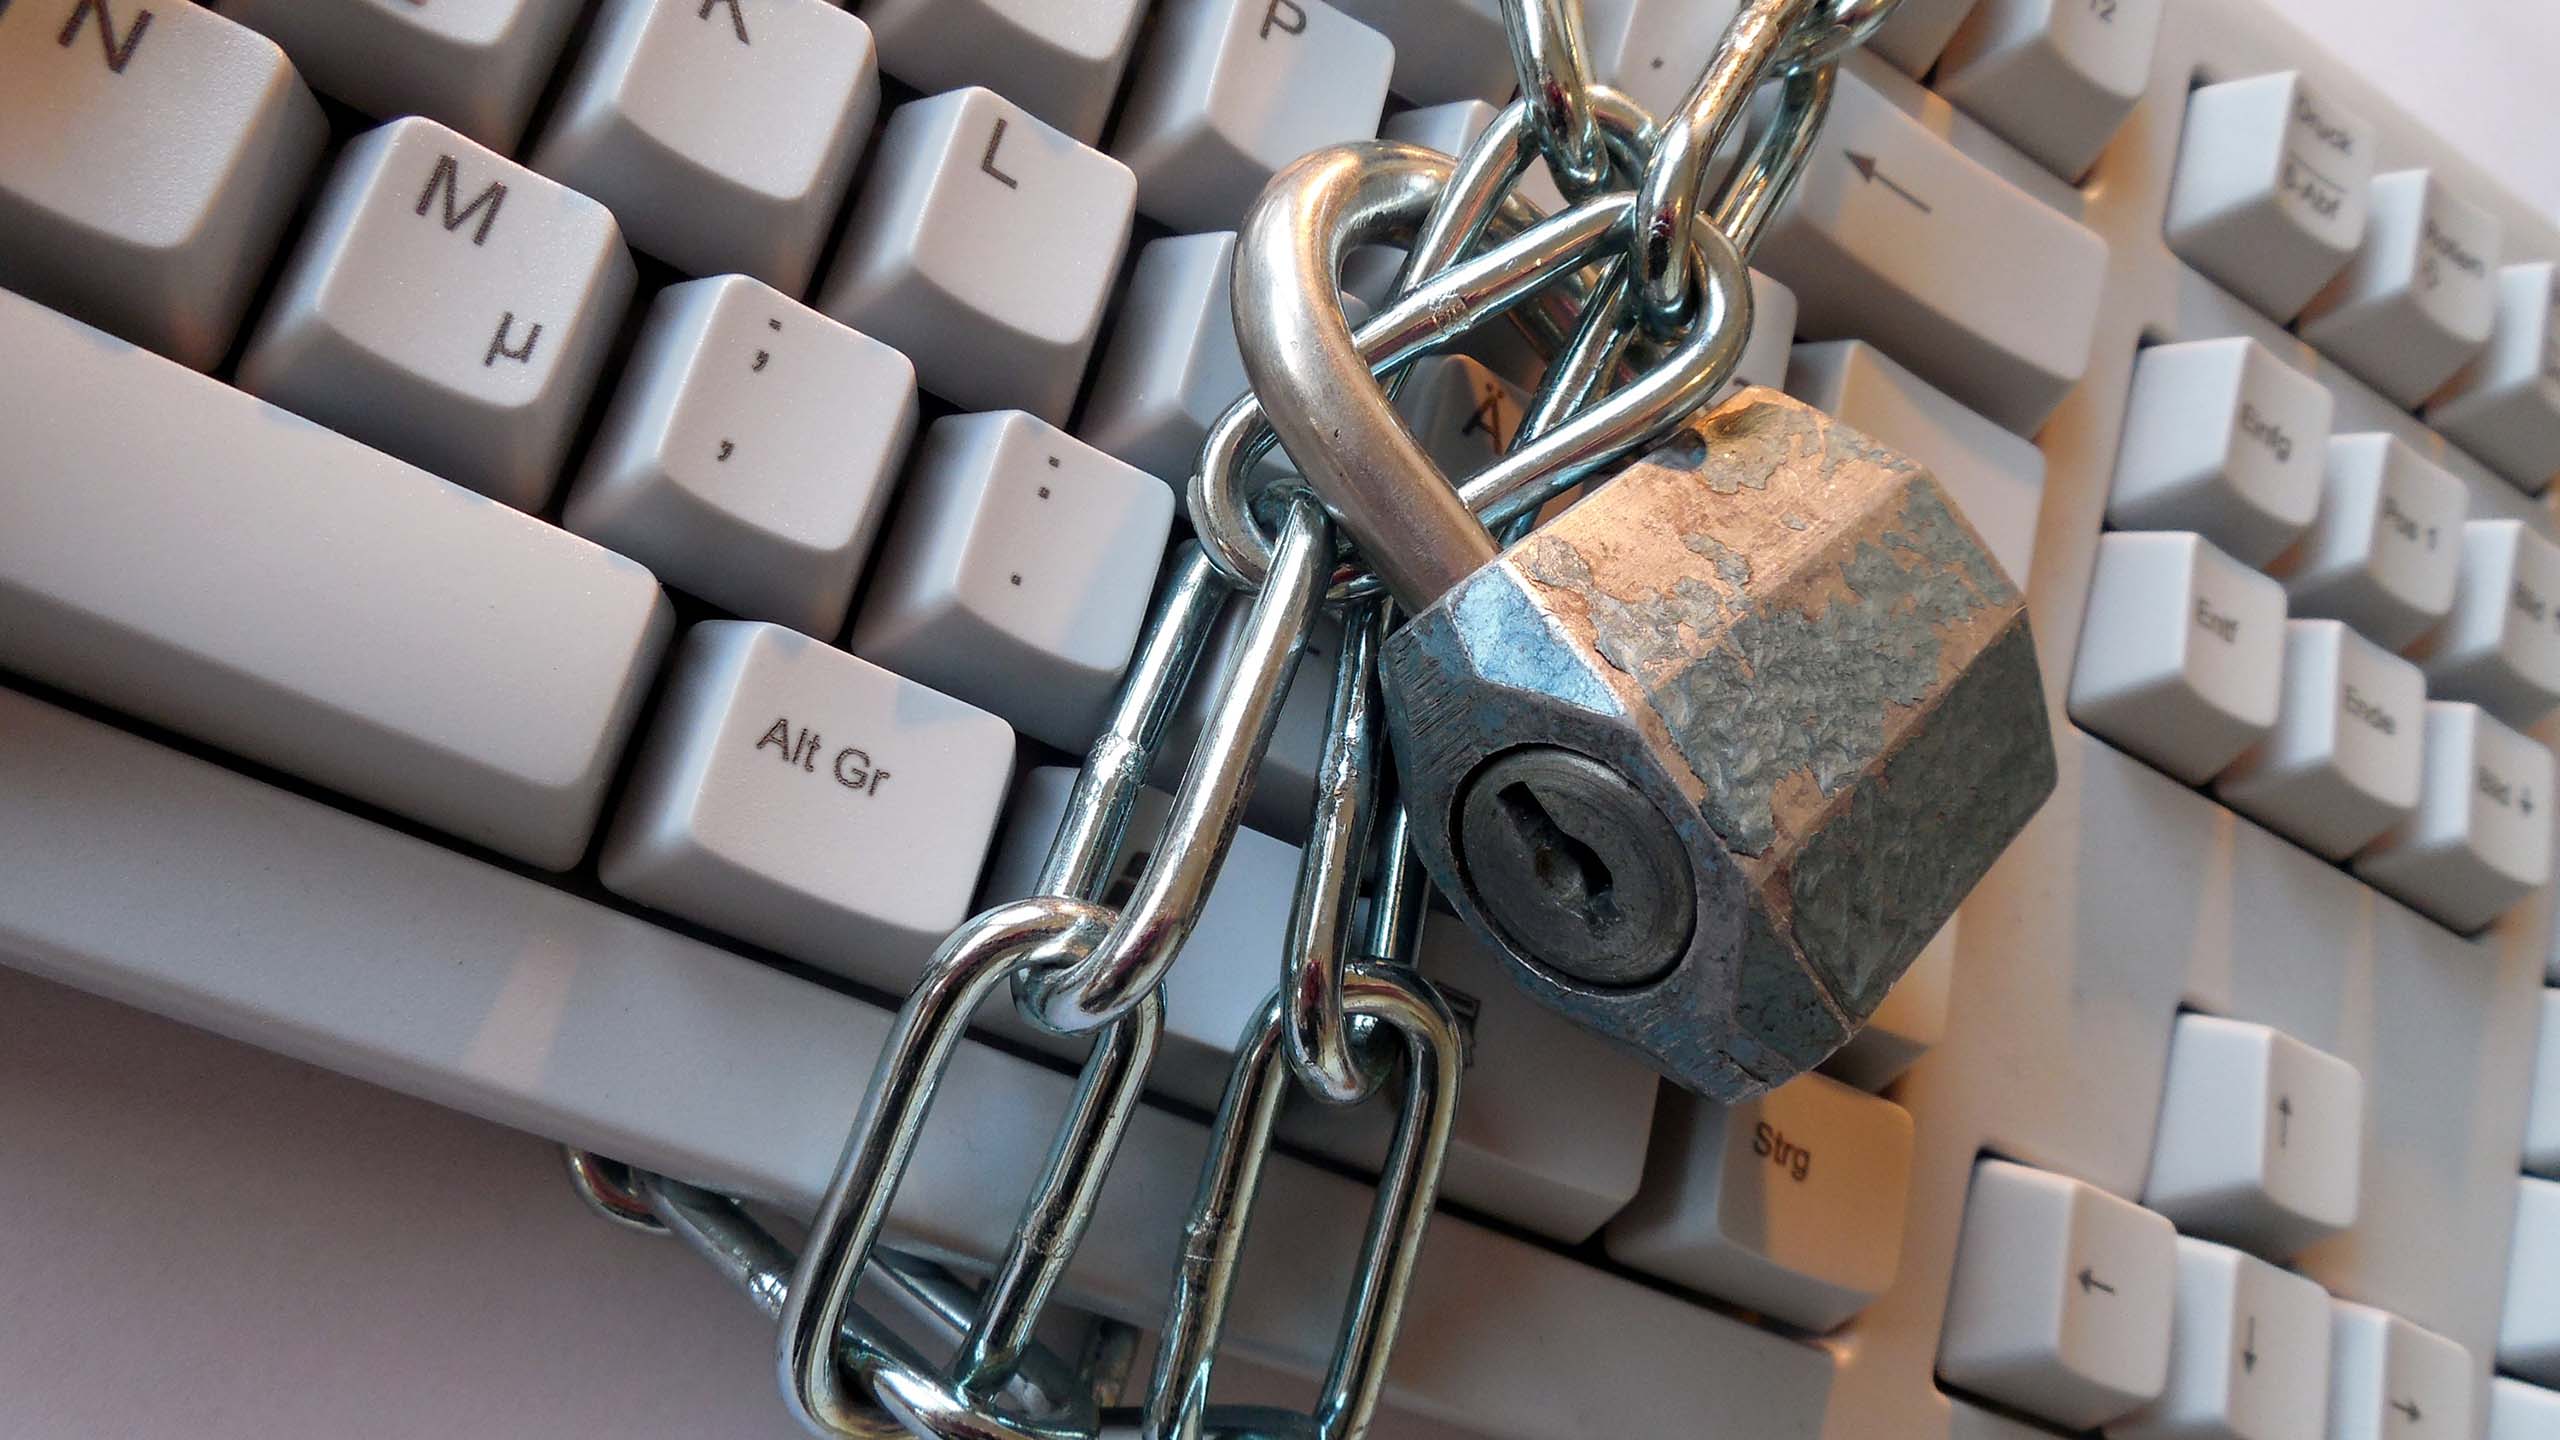 A padlock and chain wrapped around a keyboard.